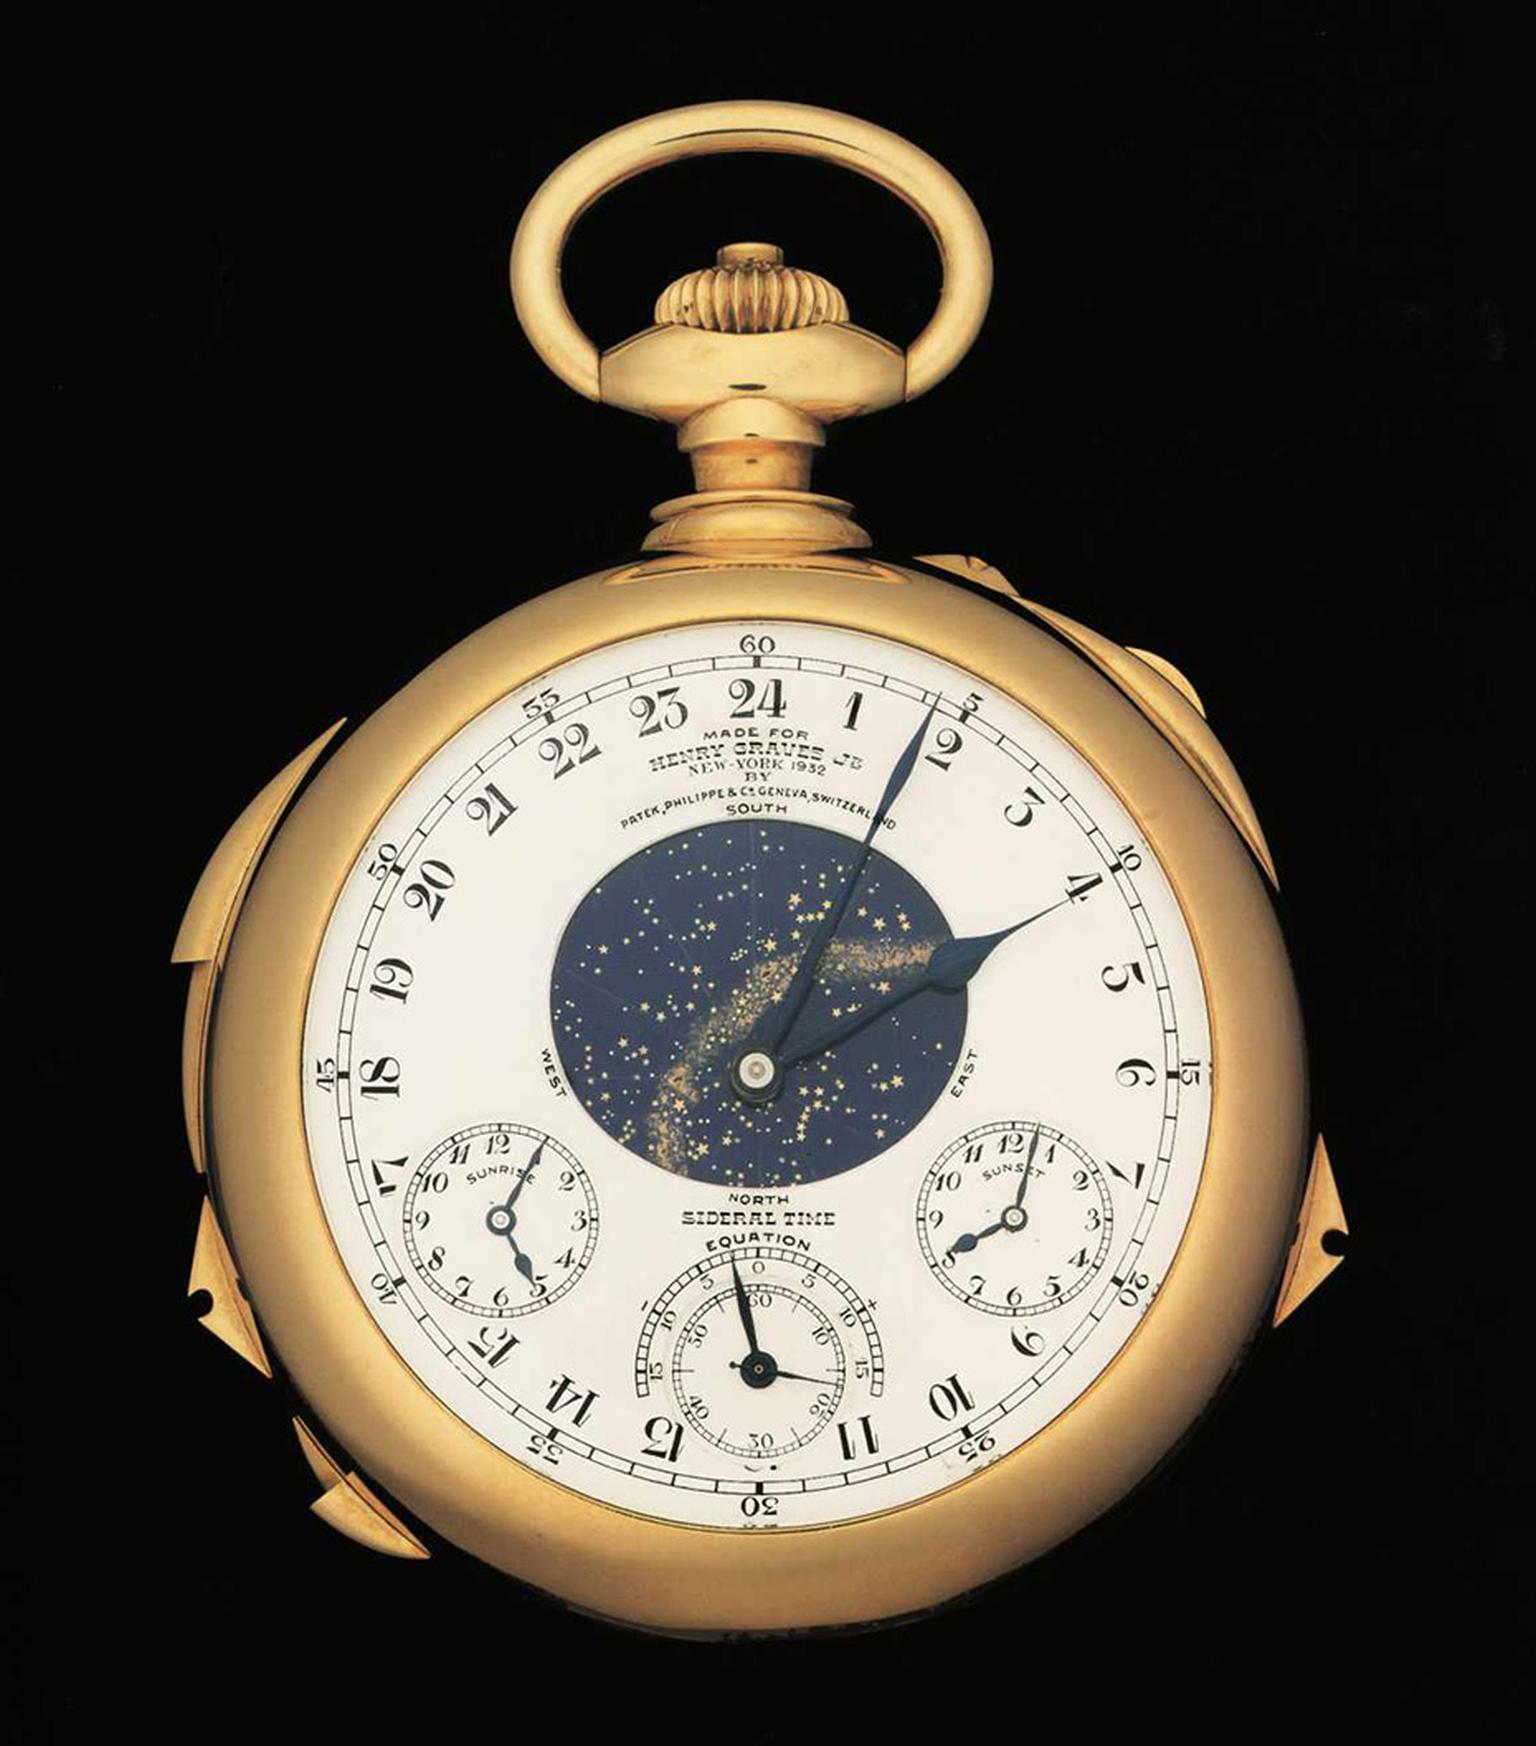 Created by Patek Philippe in 1933 and known as the 'Mona Lisa' or 'Holy Grail' of watches, the Henry Graves Supercomplication is a masterpiece of horology with no fewer than 24 complications. It goes under the hammer at Sotheby's Geneva on 14 November 201